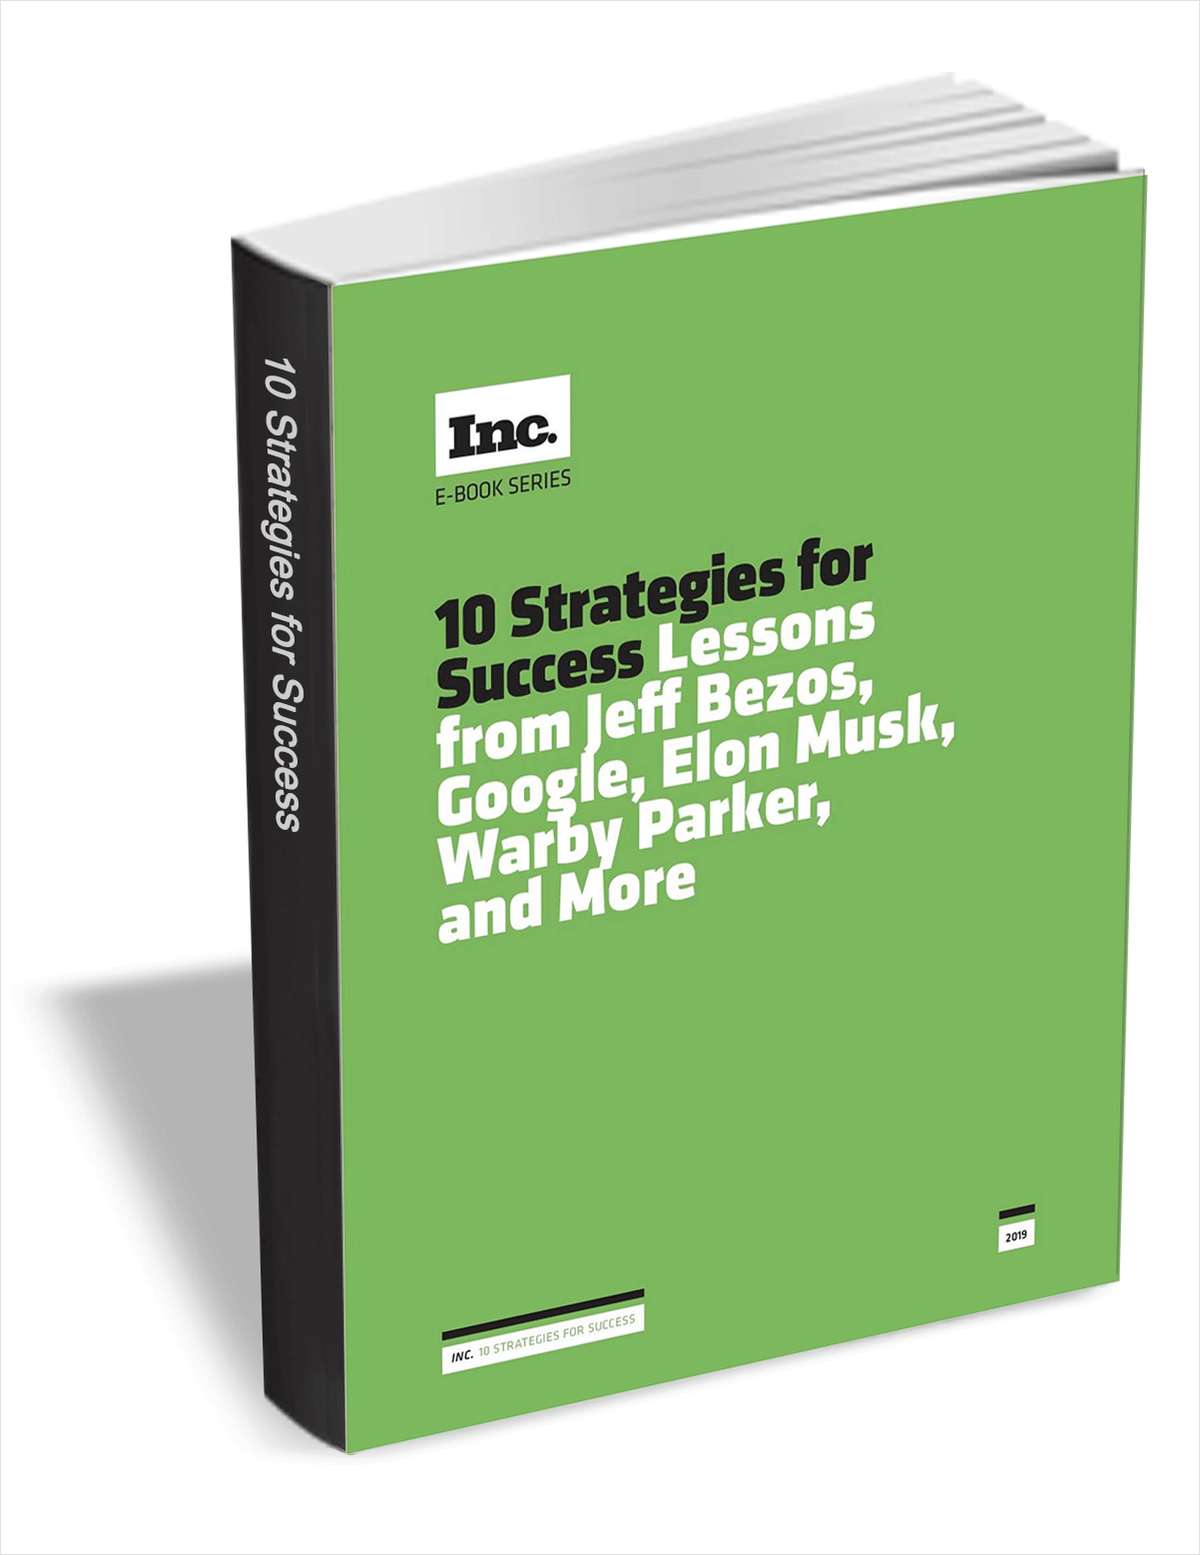 Inc.'s 10 Strategies for Success: Lessons from Jeff Bezos, Google, Elon Musk, Warby Parker, and More